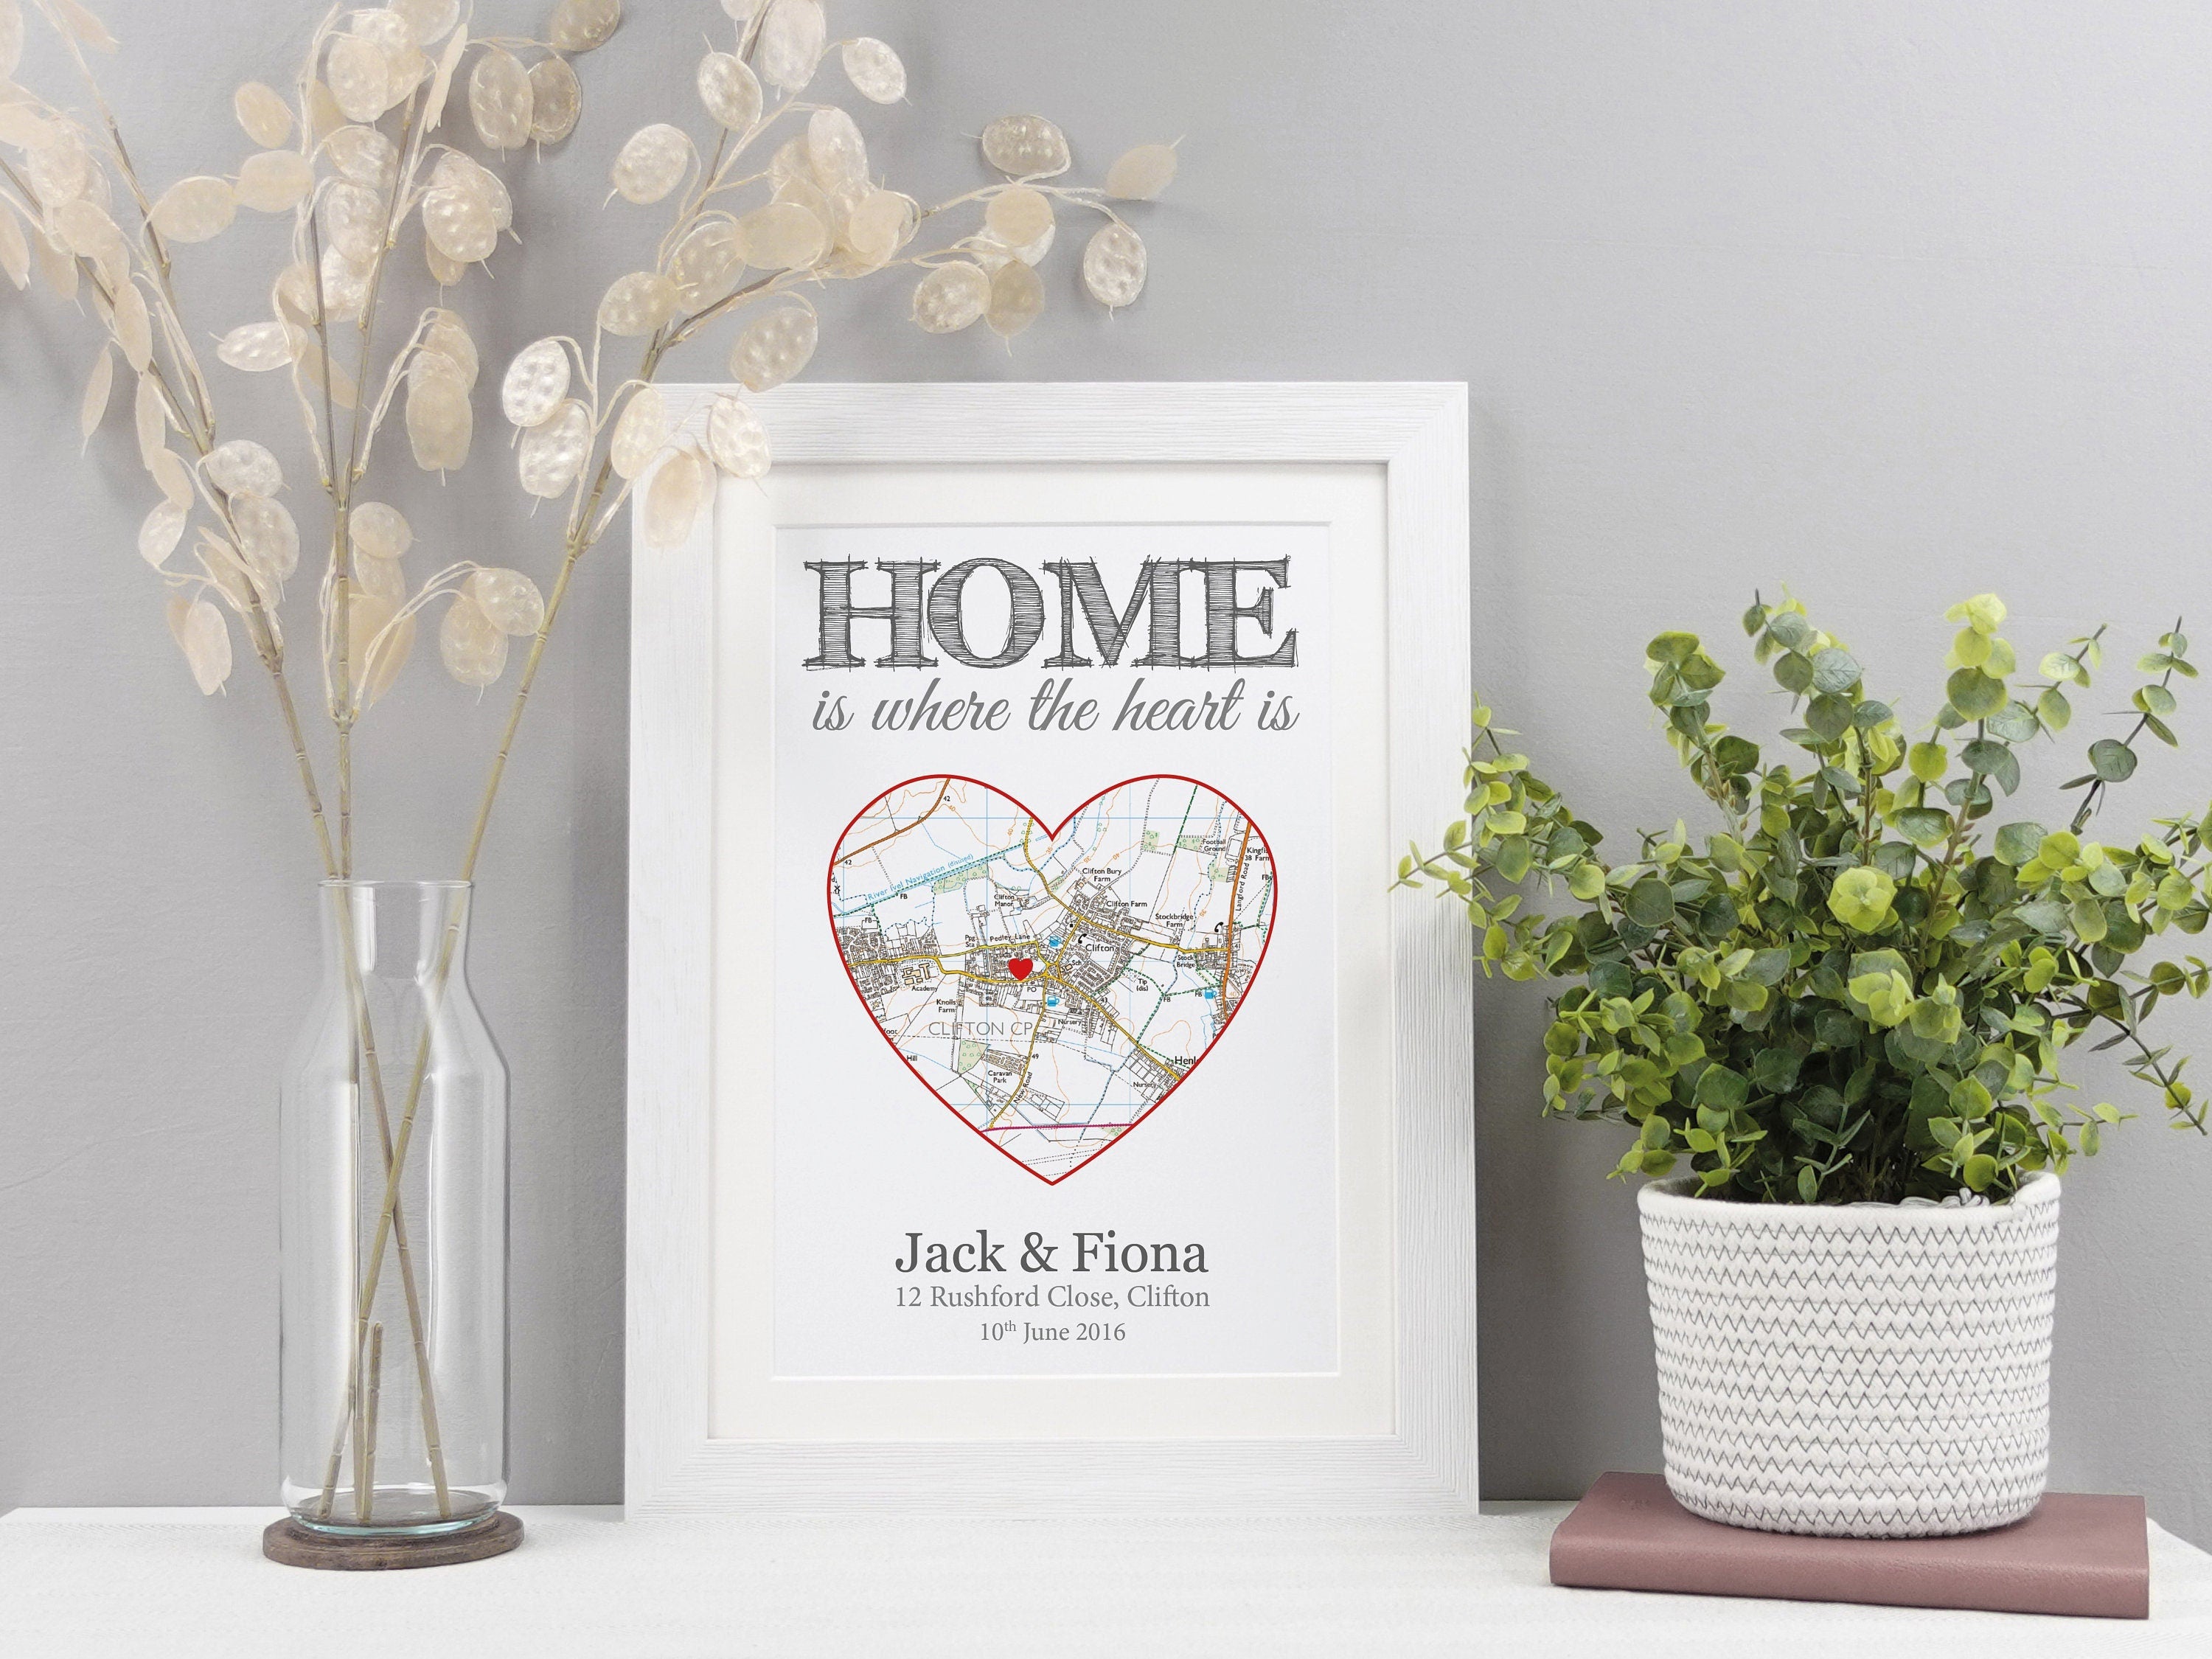 New home gift first personalised house warming present house memories  family | eBay